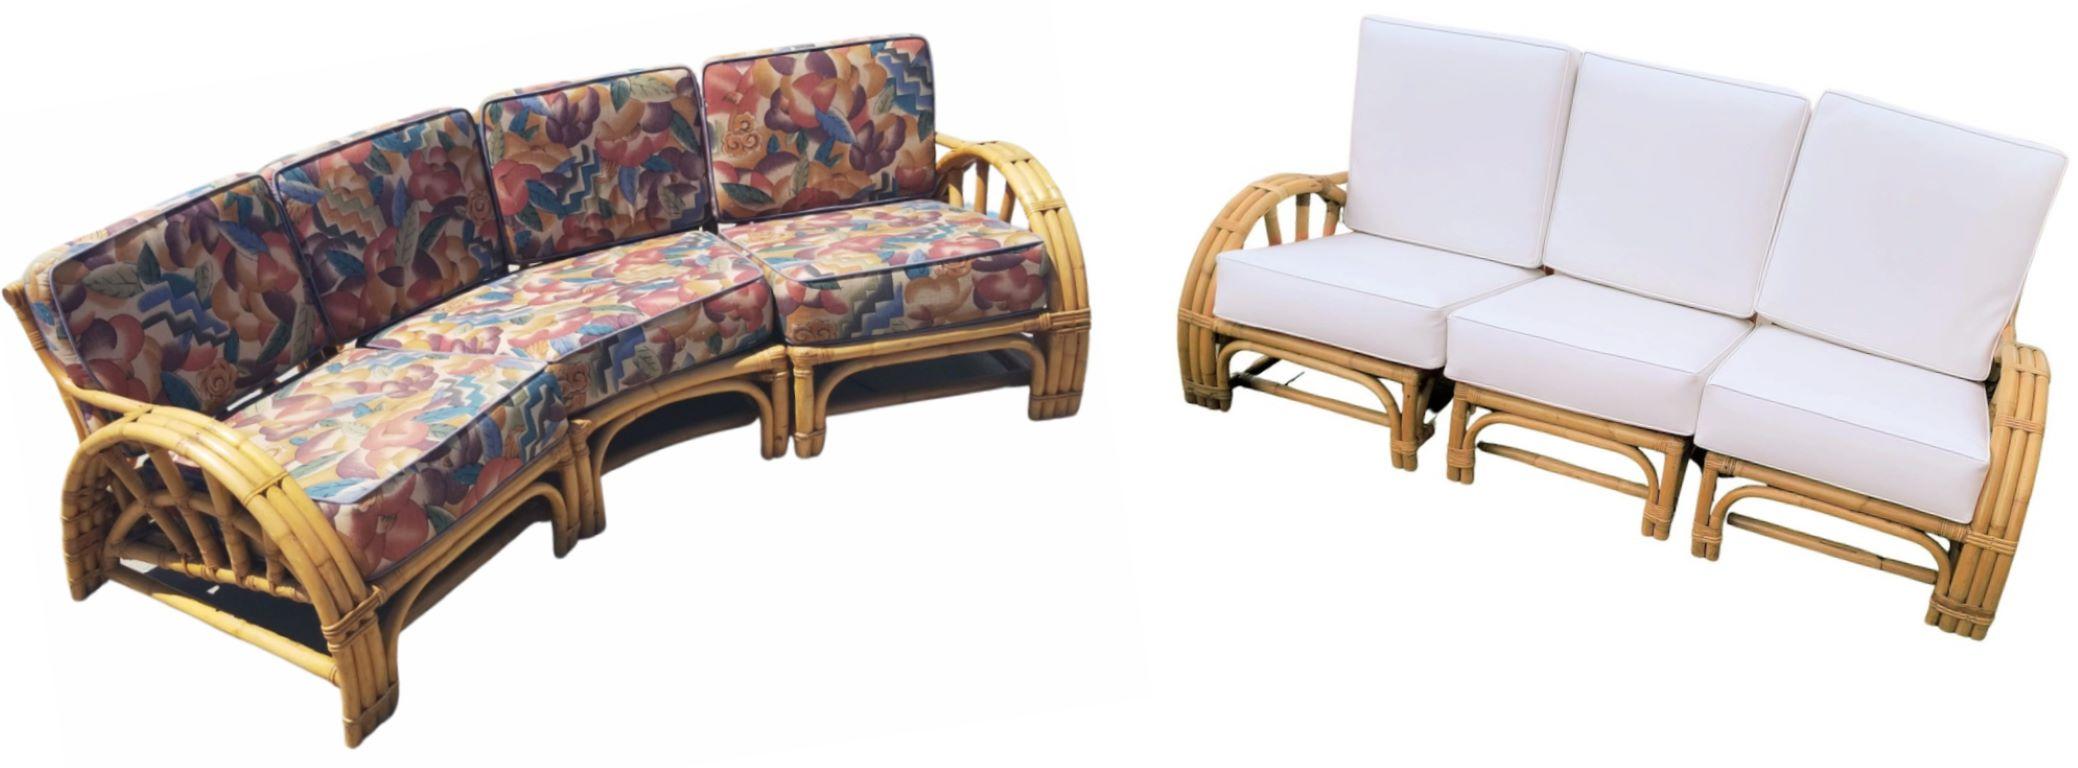 Living room set of 2 three-piece sofa's, one curved and one straight, both with matching three-strand half-moon spoke arms.

Restored 1930 three-strand half-moon sectional spoked sofas in the manner of Paul Frankl with the well-known 